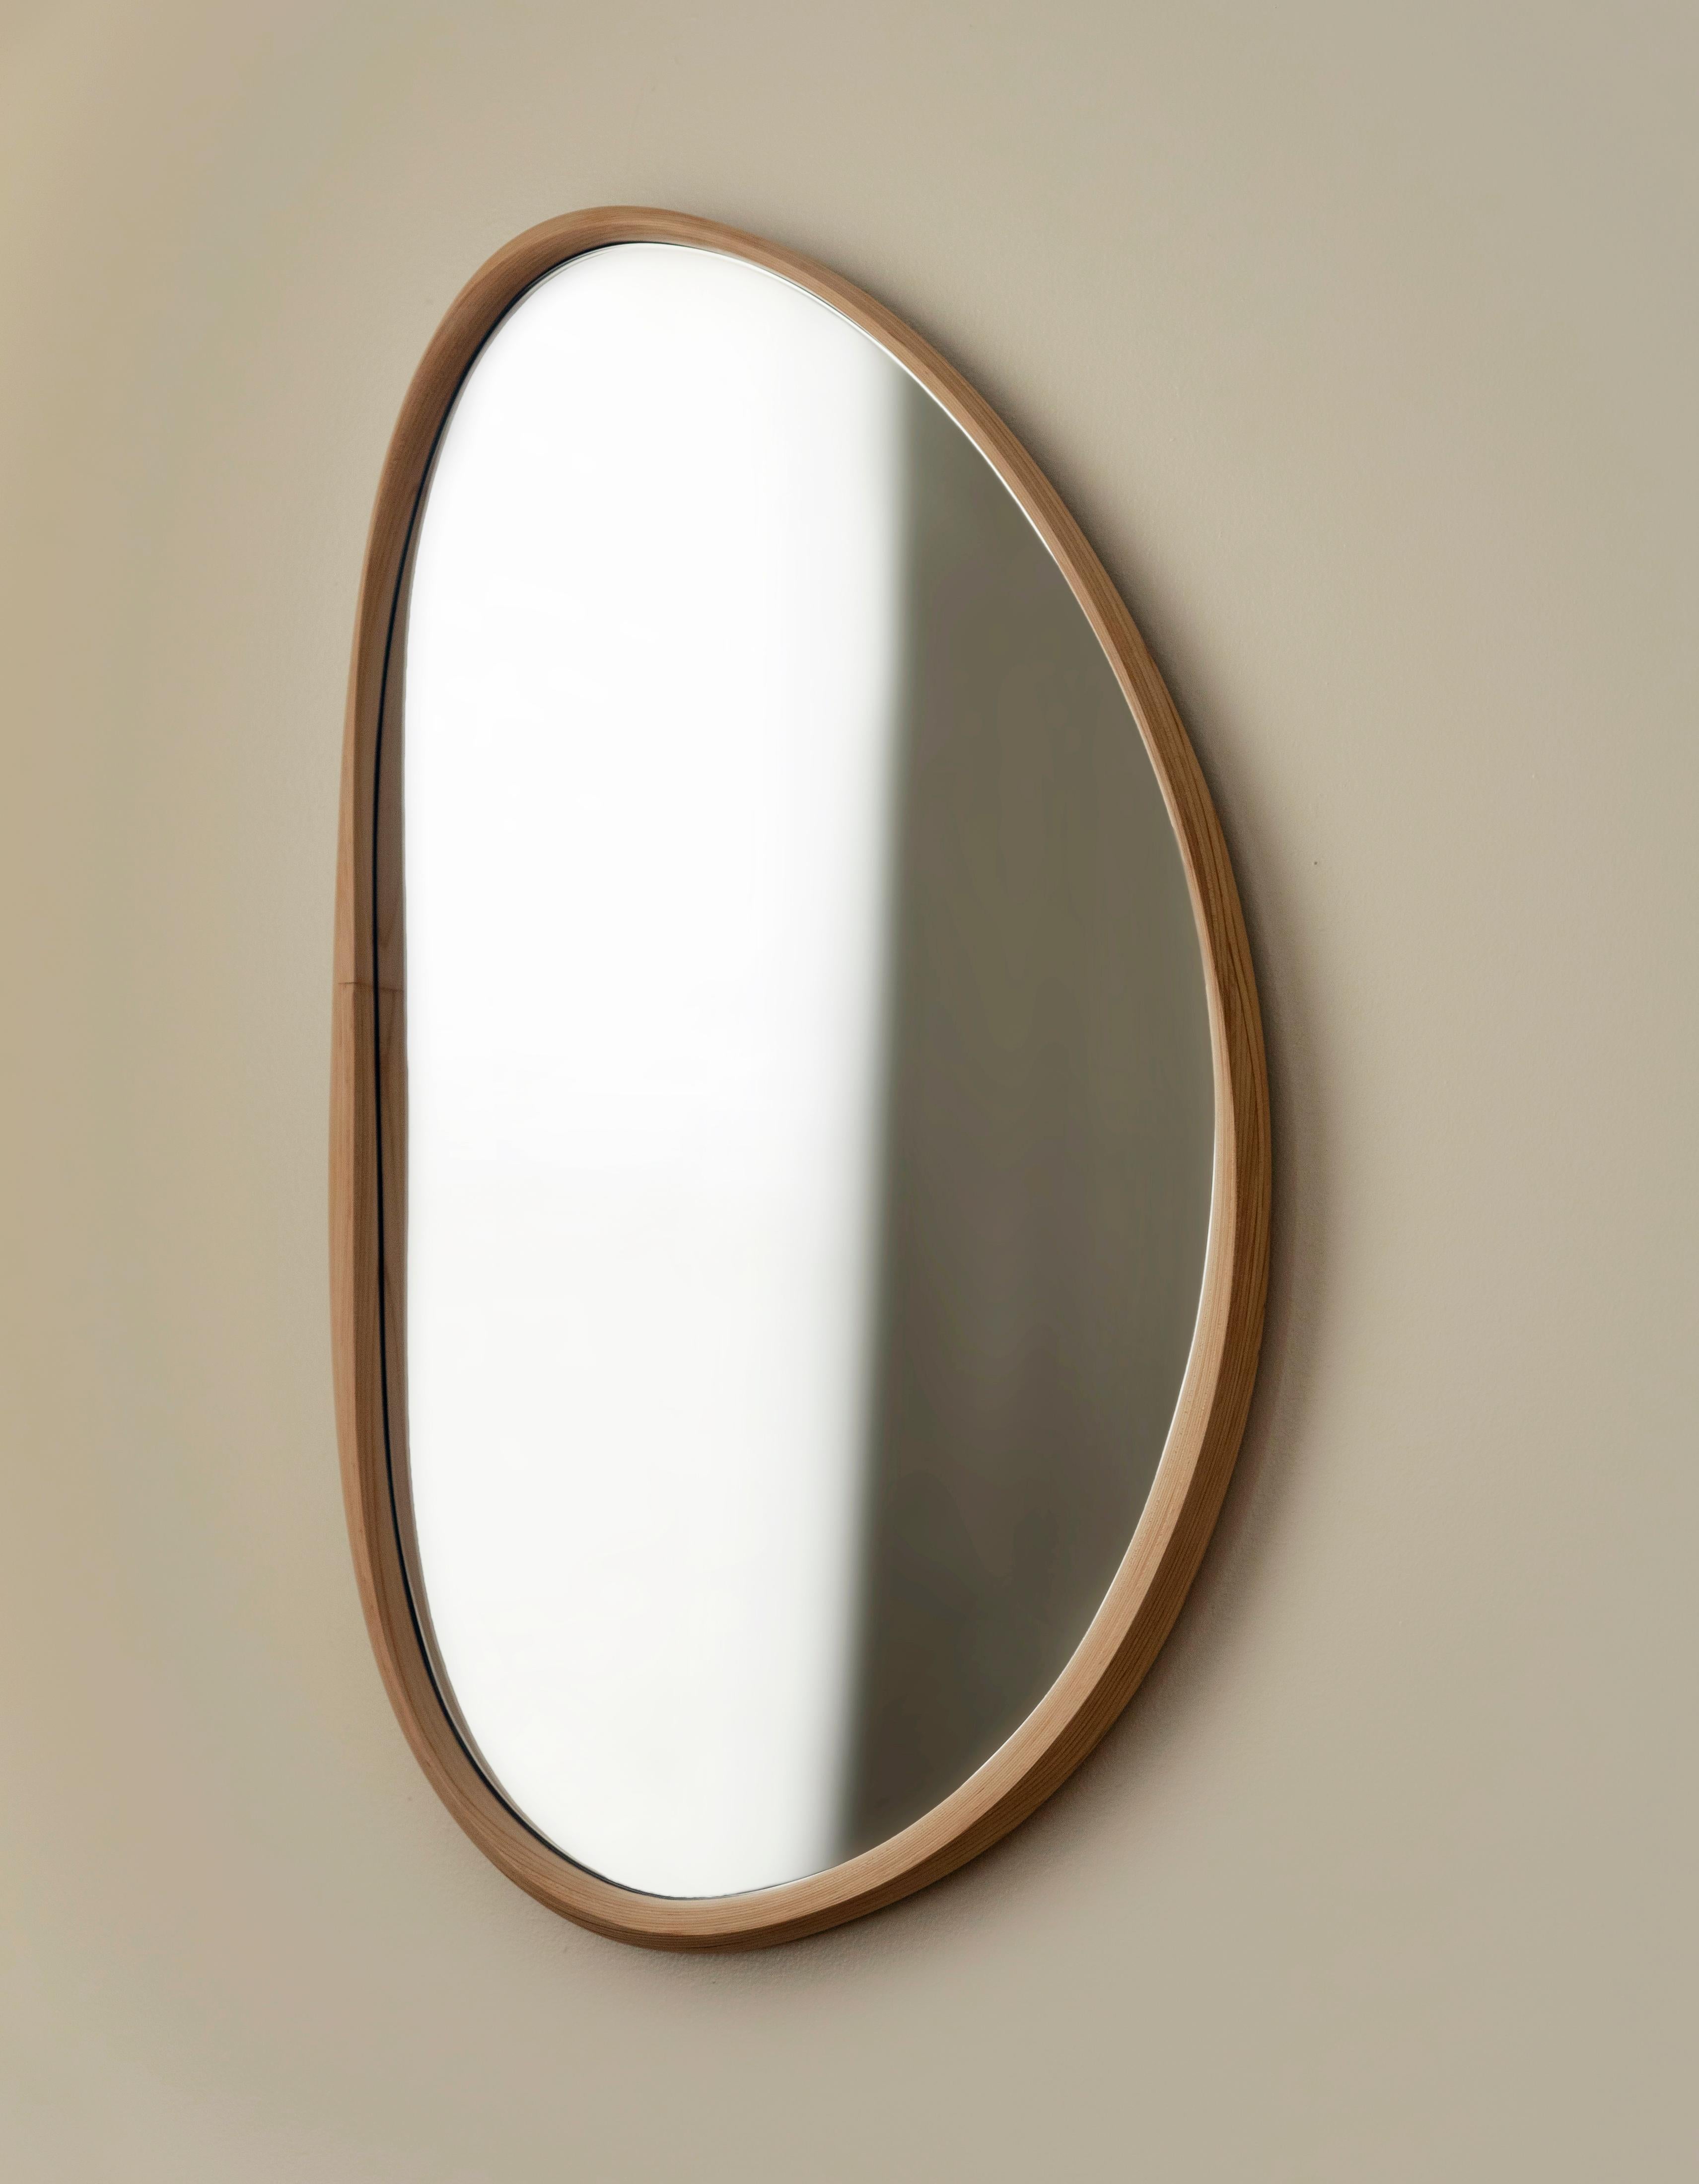 Pebble mirror uses the traditional woodworking technique of bent-lamination to preserve the beauty of twisted wood and preserve tension into a solid object. The undulating thin and thick frame is delicately hand-carved by the artist from fifty